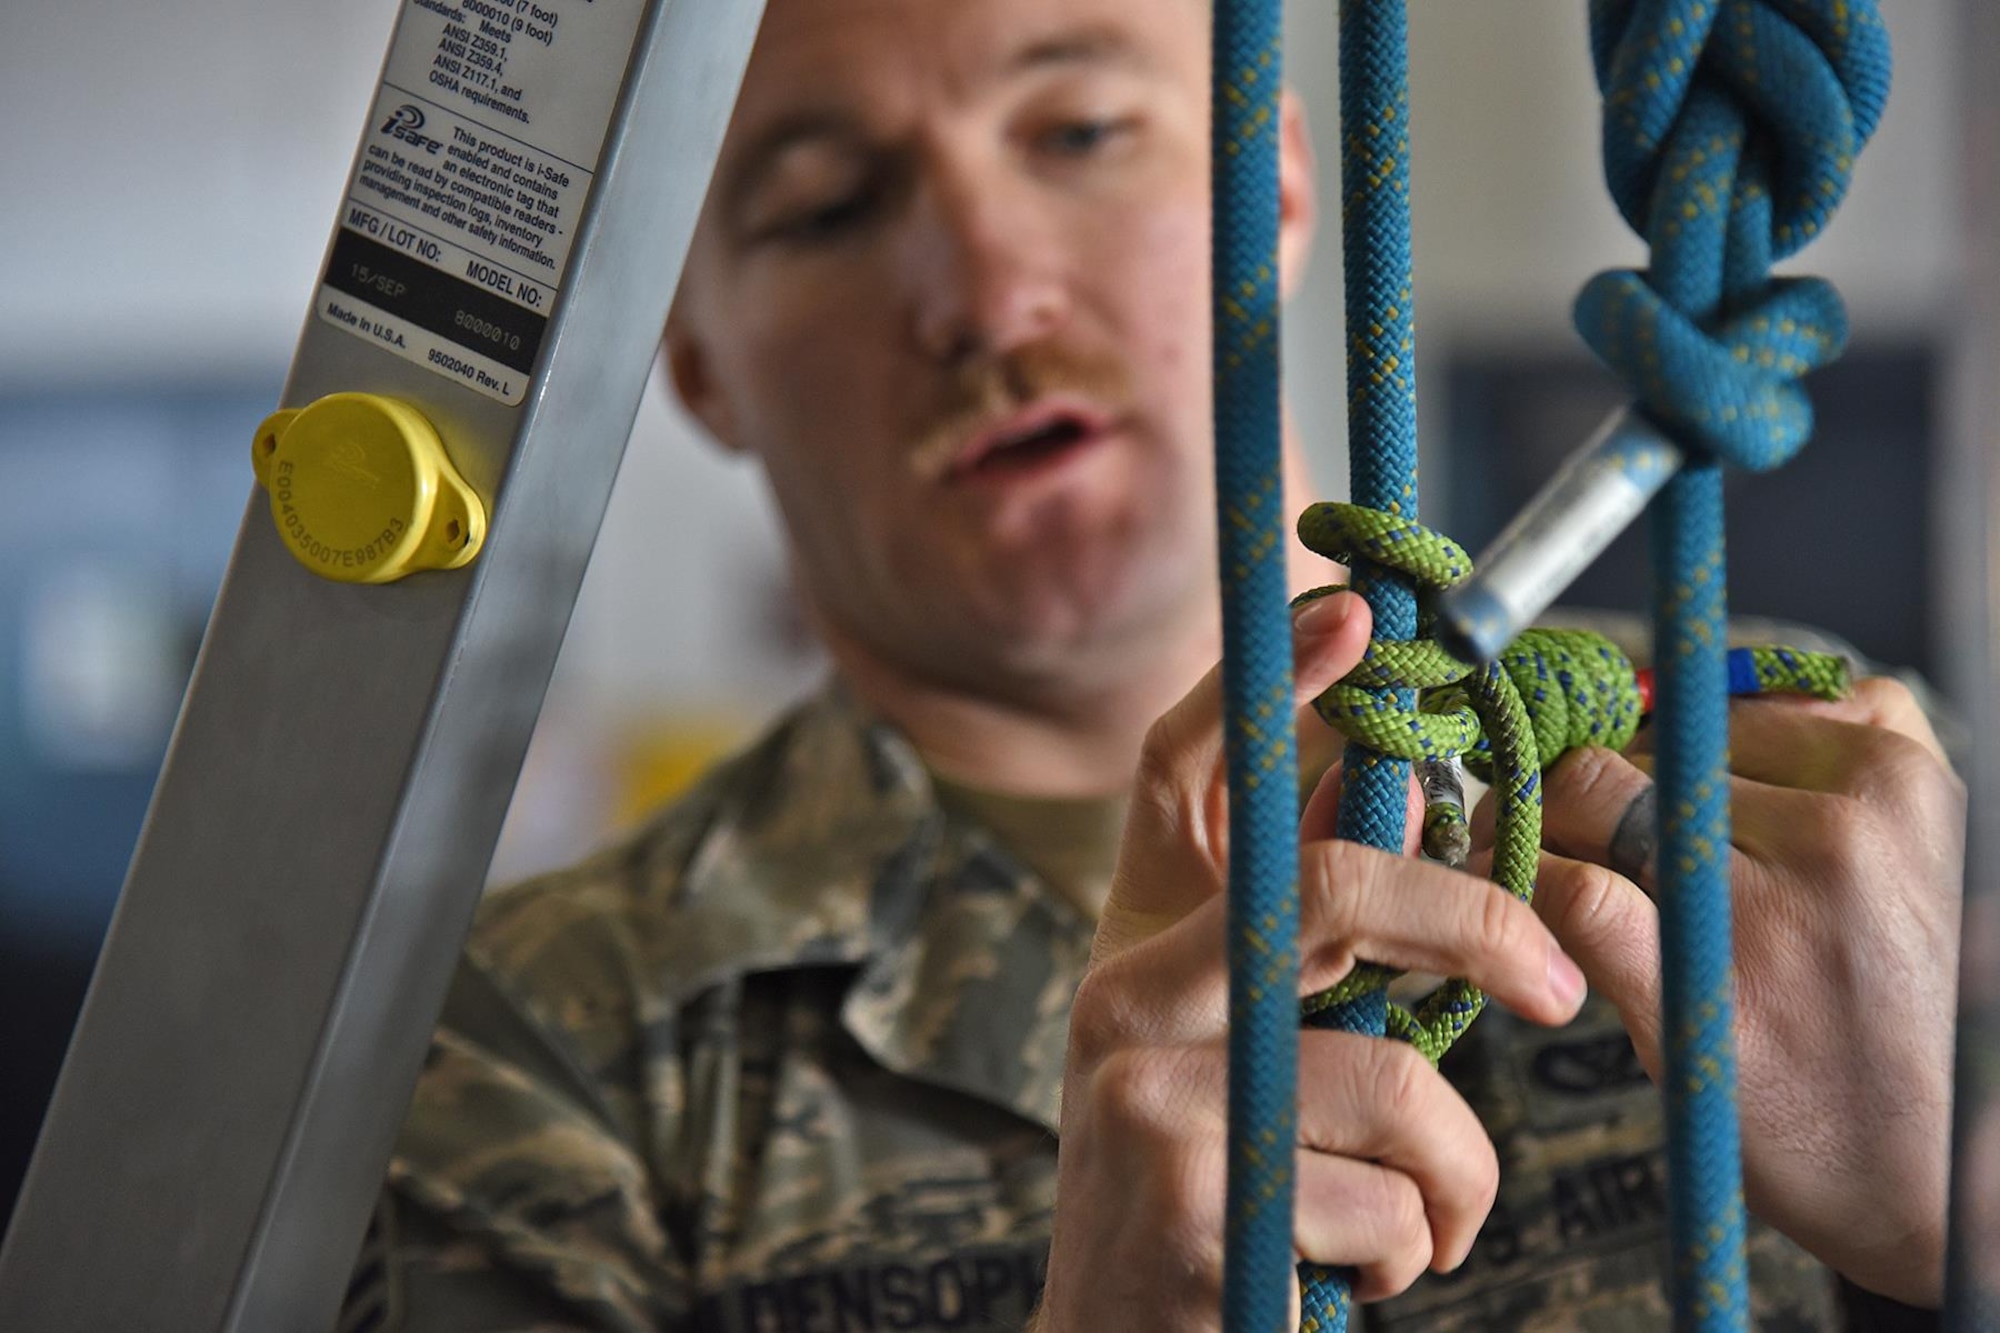 Senior Airman Curtis Goldensoph, 92nd Civil Engineer Squadron fire protection journeyman, assists in completing a lifting system during a confined spaces training Jan. 27, 2017, Fairchild Air Force Base, Wash. On average, Fairchild firefighters attend 15 to 20 classes per month to maintain skills, certifications and requirements gained throughout their careers. (U.S. Air Force photo/Senior Airman Mackenzie Richardson)